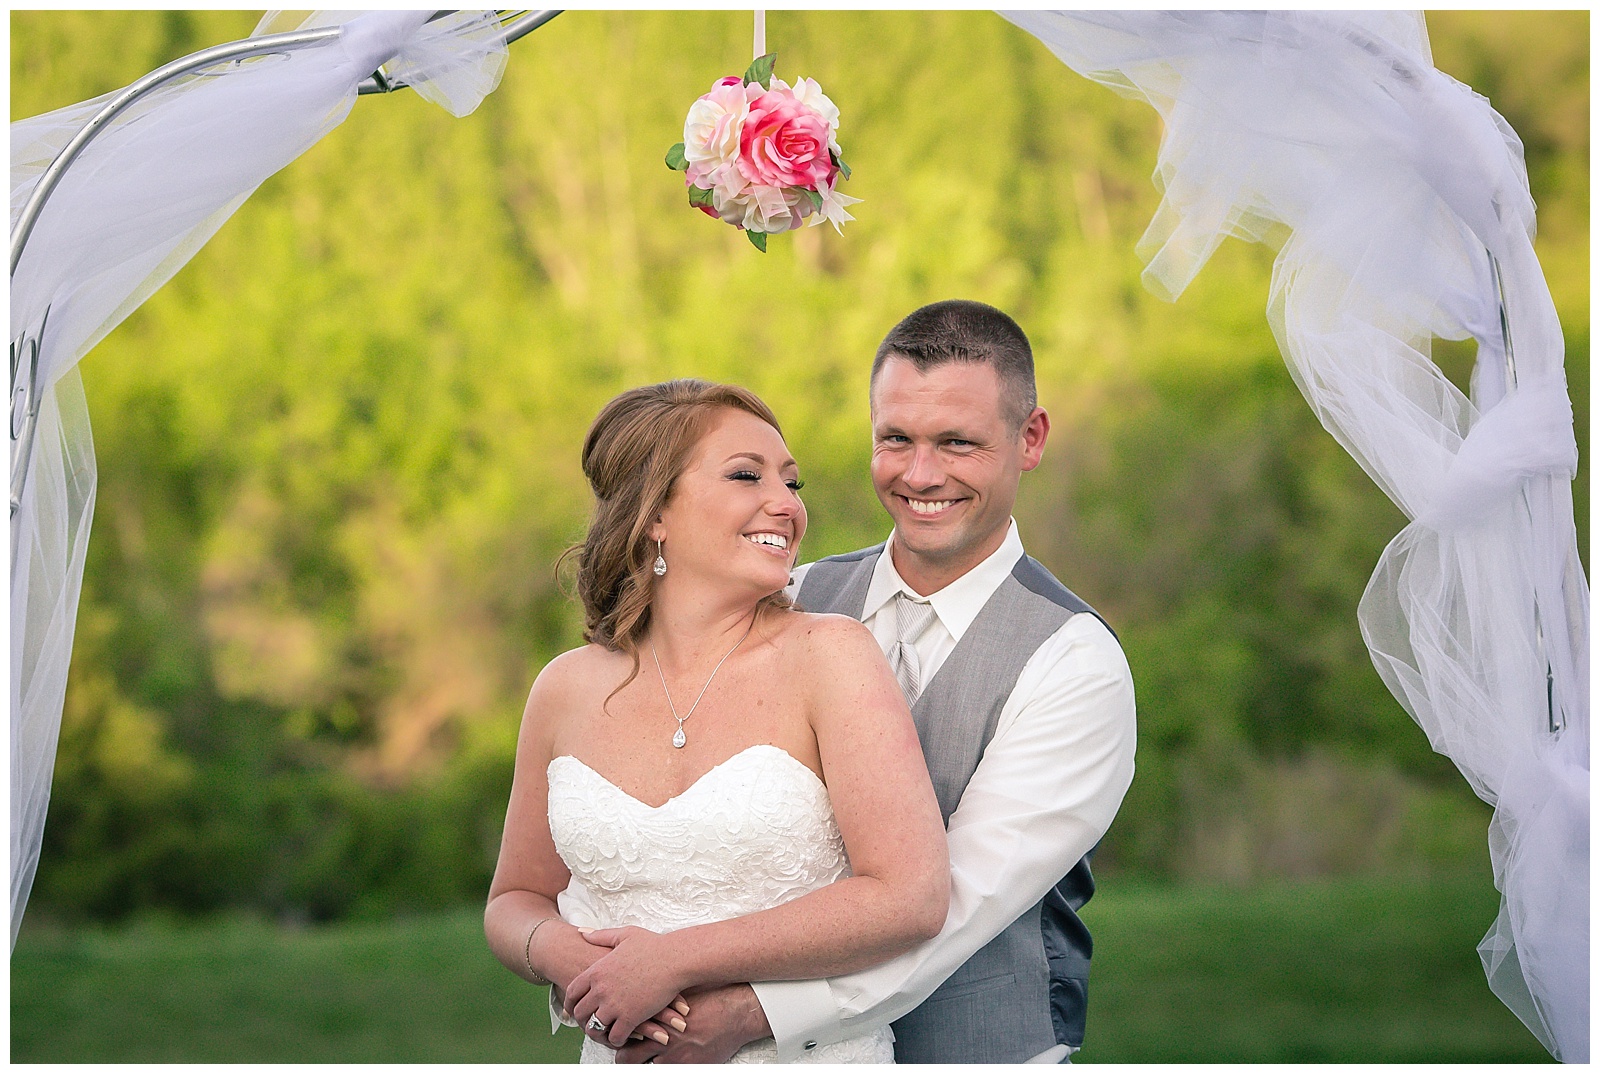 Wedding photography at The Elk's Lodge in Blue Springs, Missouri.